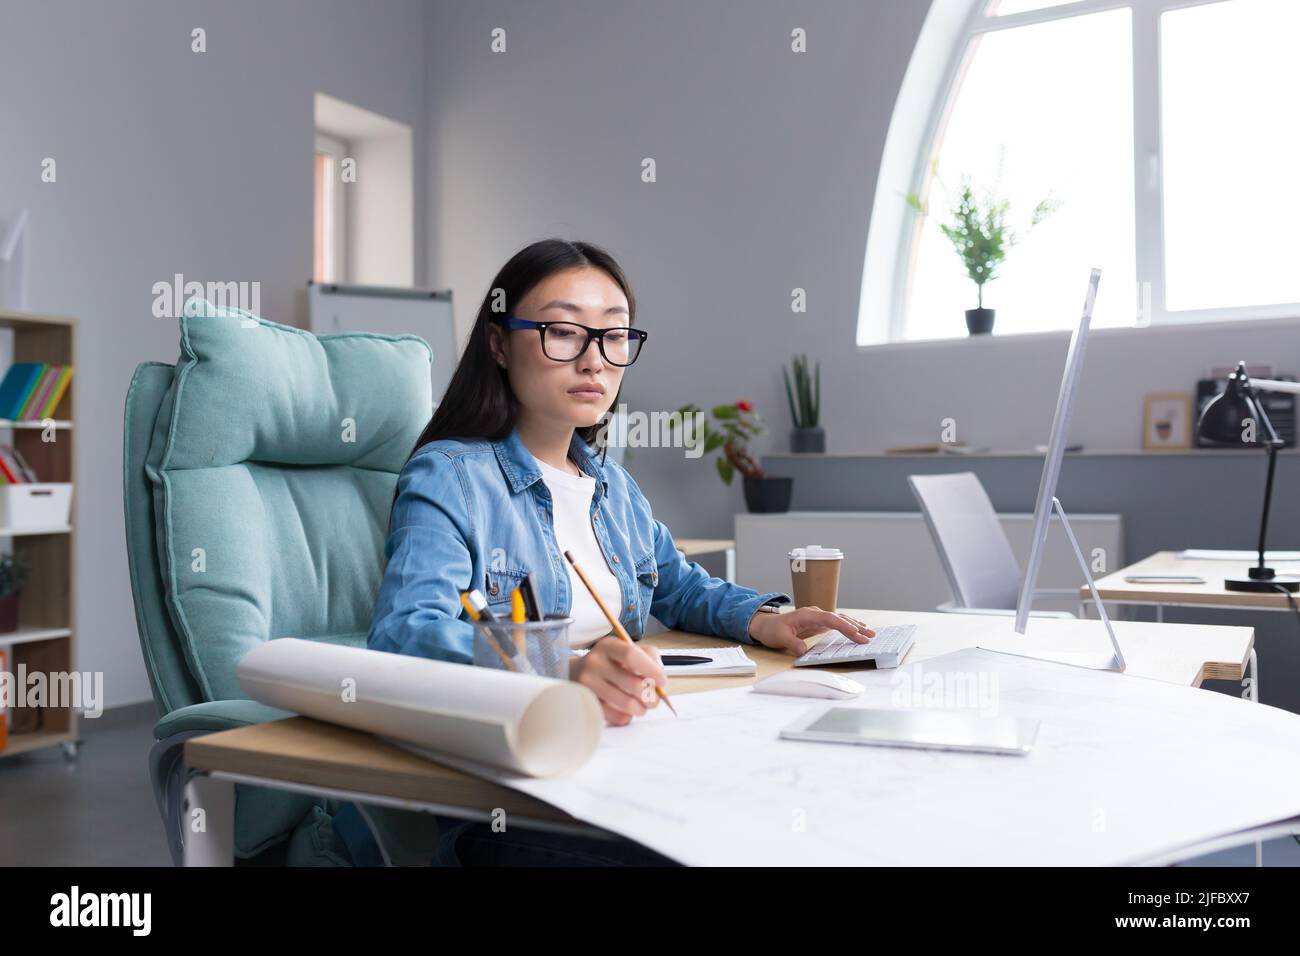 Young beautiful Asian female architect working on a project in an architectural office studio. Stock Photo